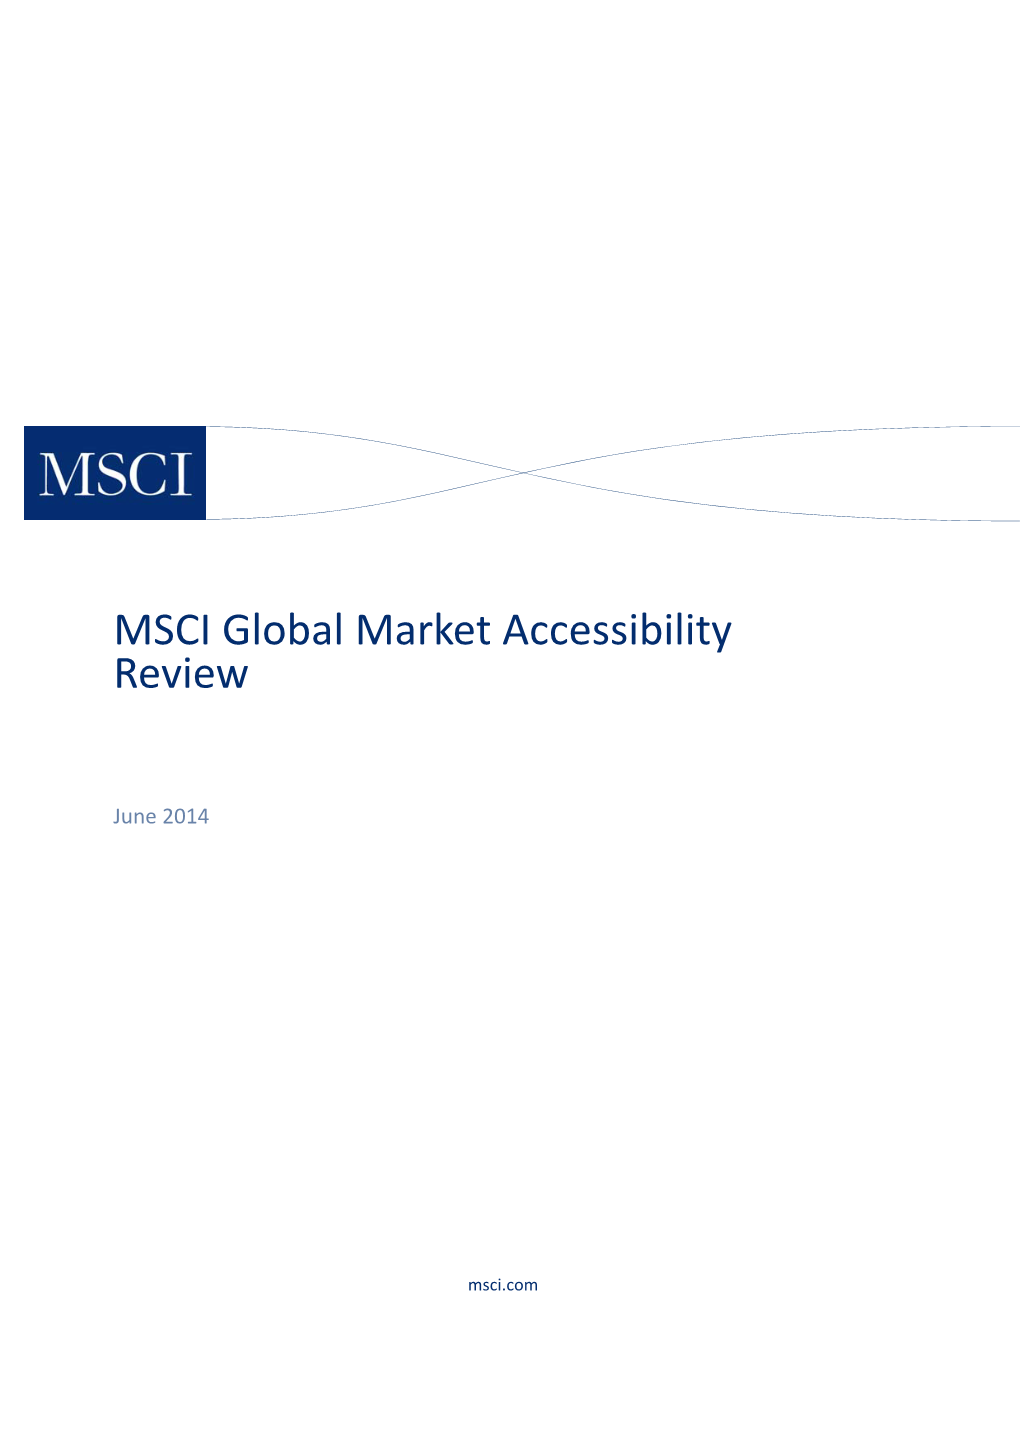 MSCI Global Market Accessibility Review